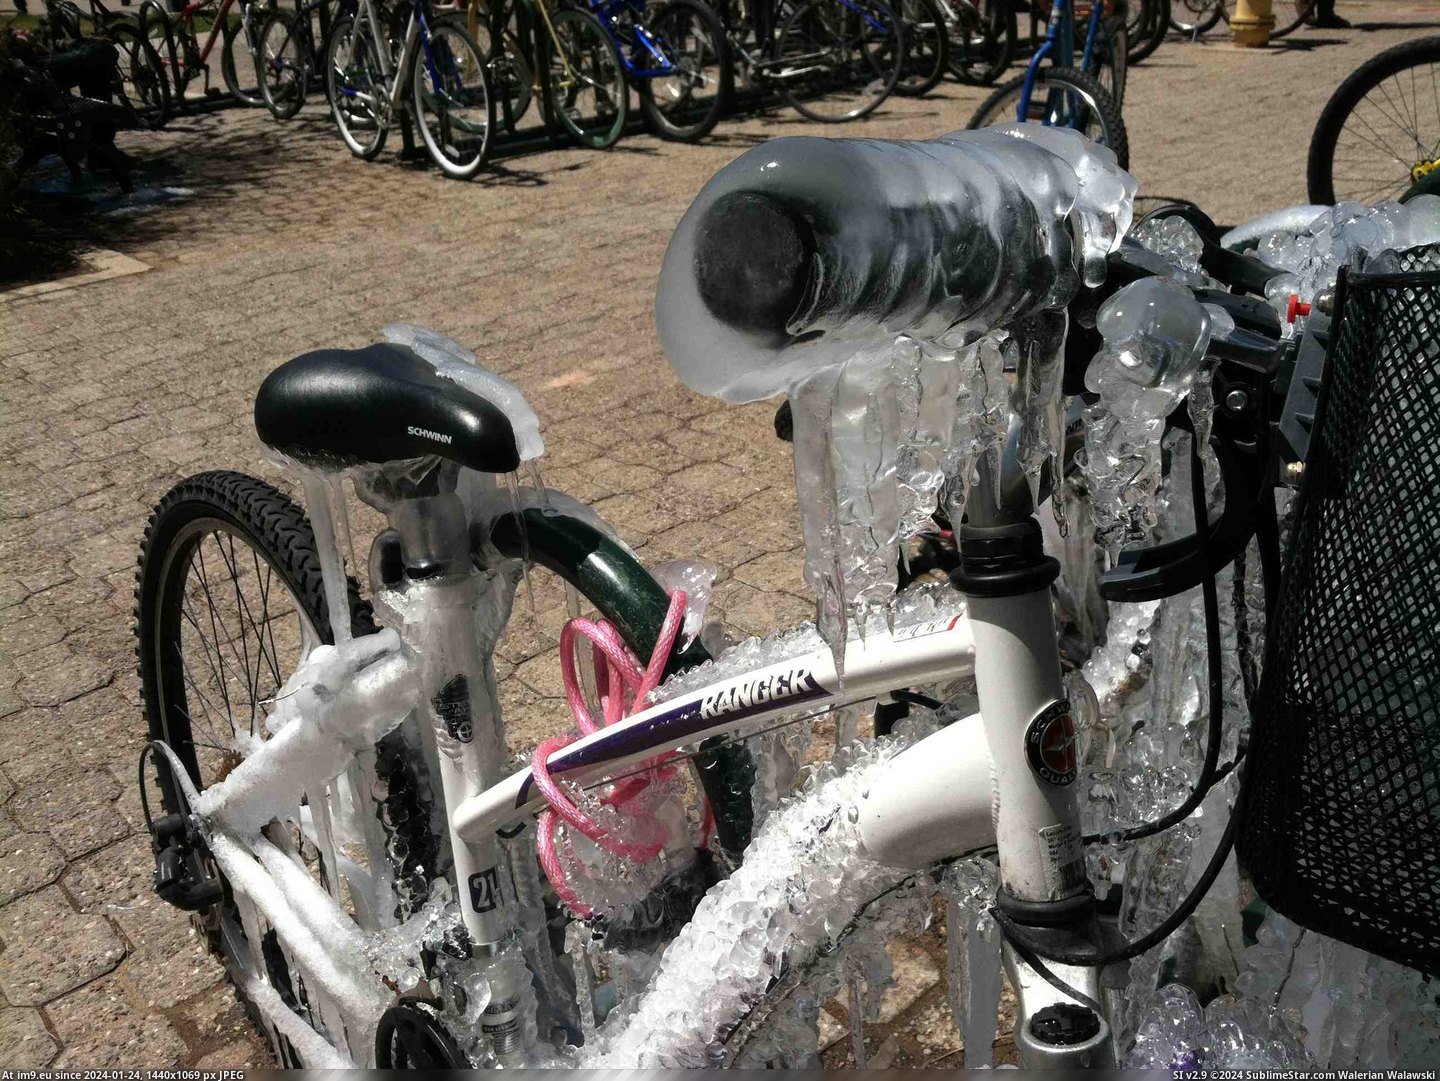 #Wtf #Bike #Temperatures #Sprinklers #Rack #Freezing [Wtf] When sprinklers come on next to the bike rack in freezing temperatures... Pic. (Bild von album My r/WTF favs))